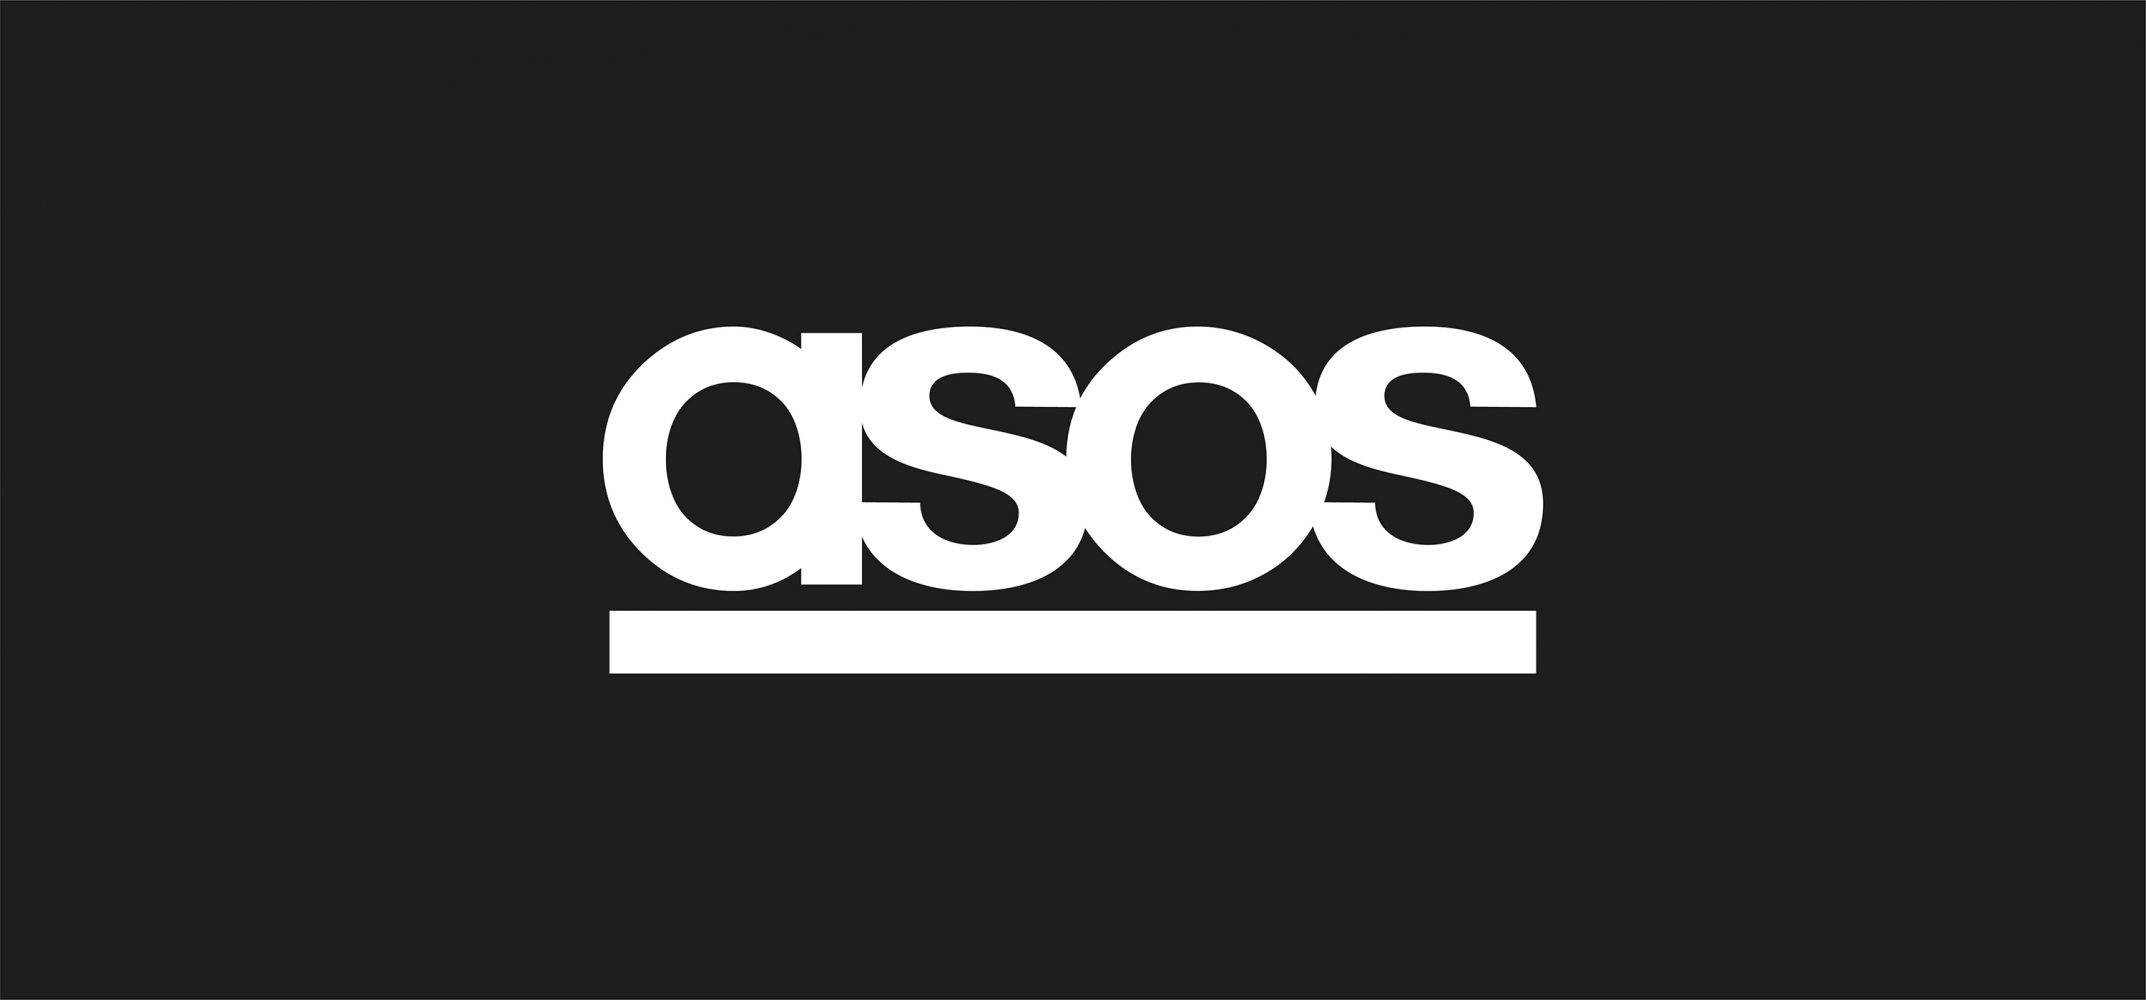 ASOS logo, brand identity, labelling and packaging design by Household.